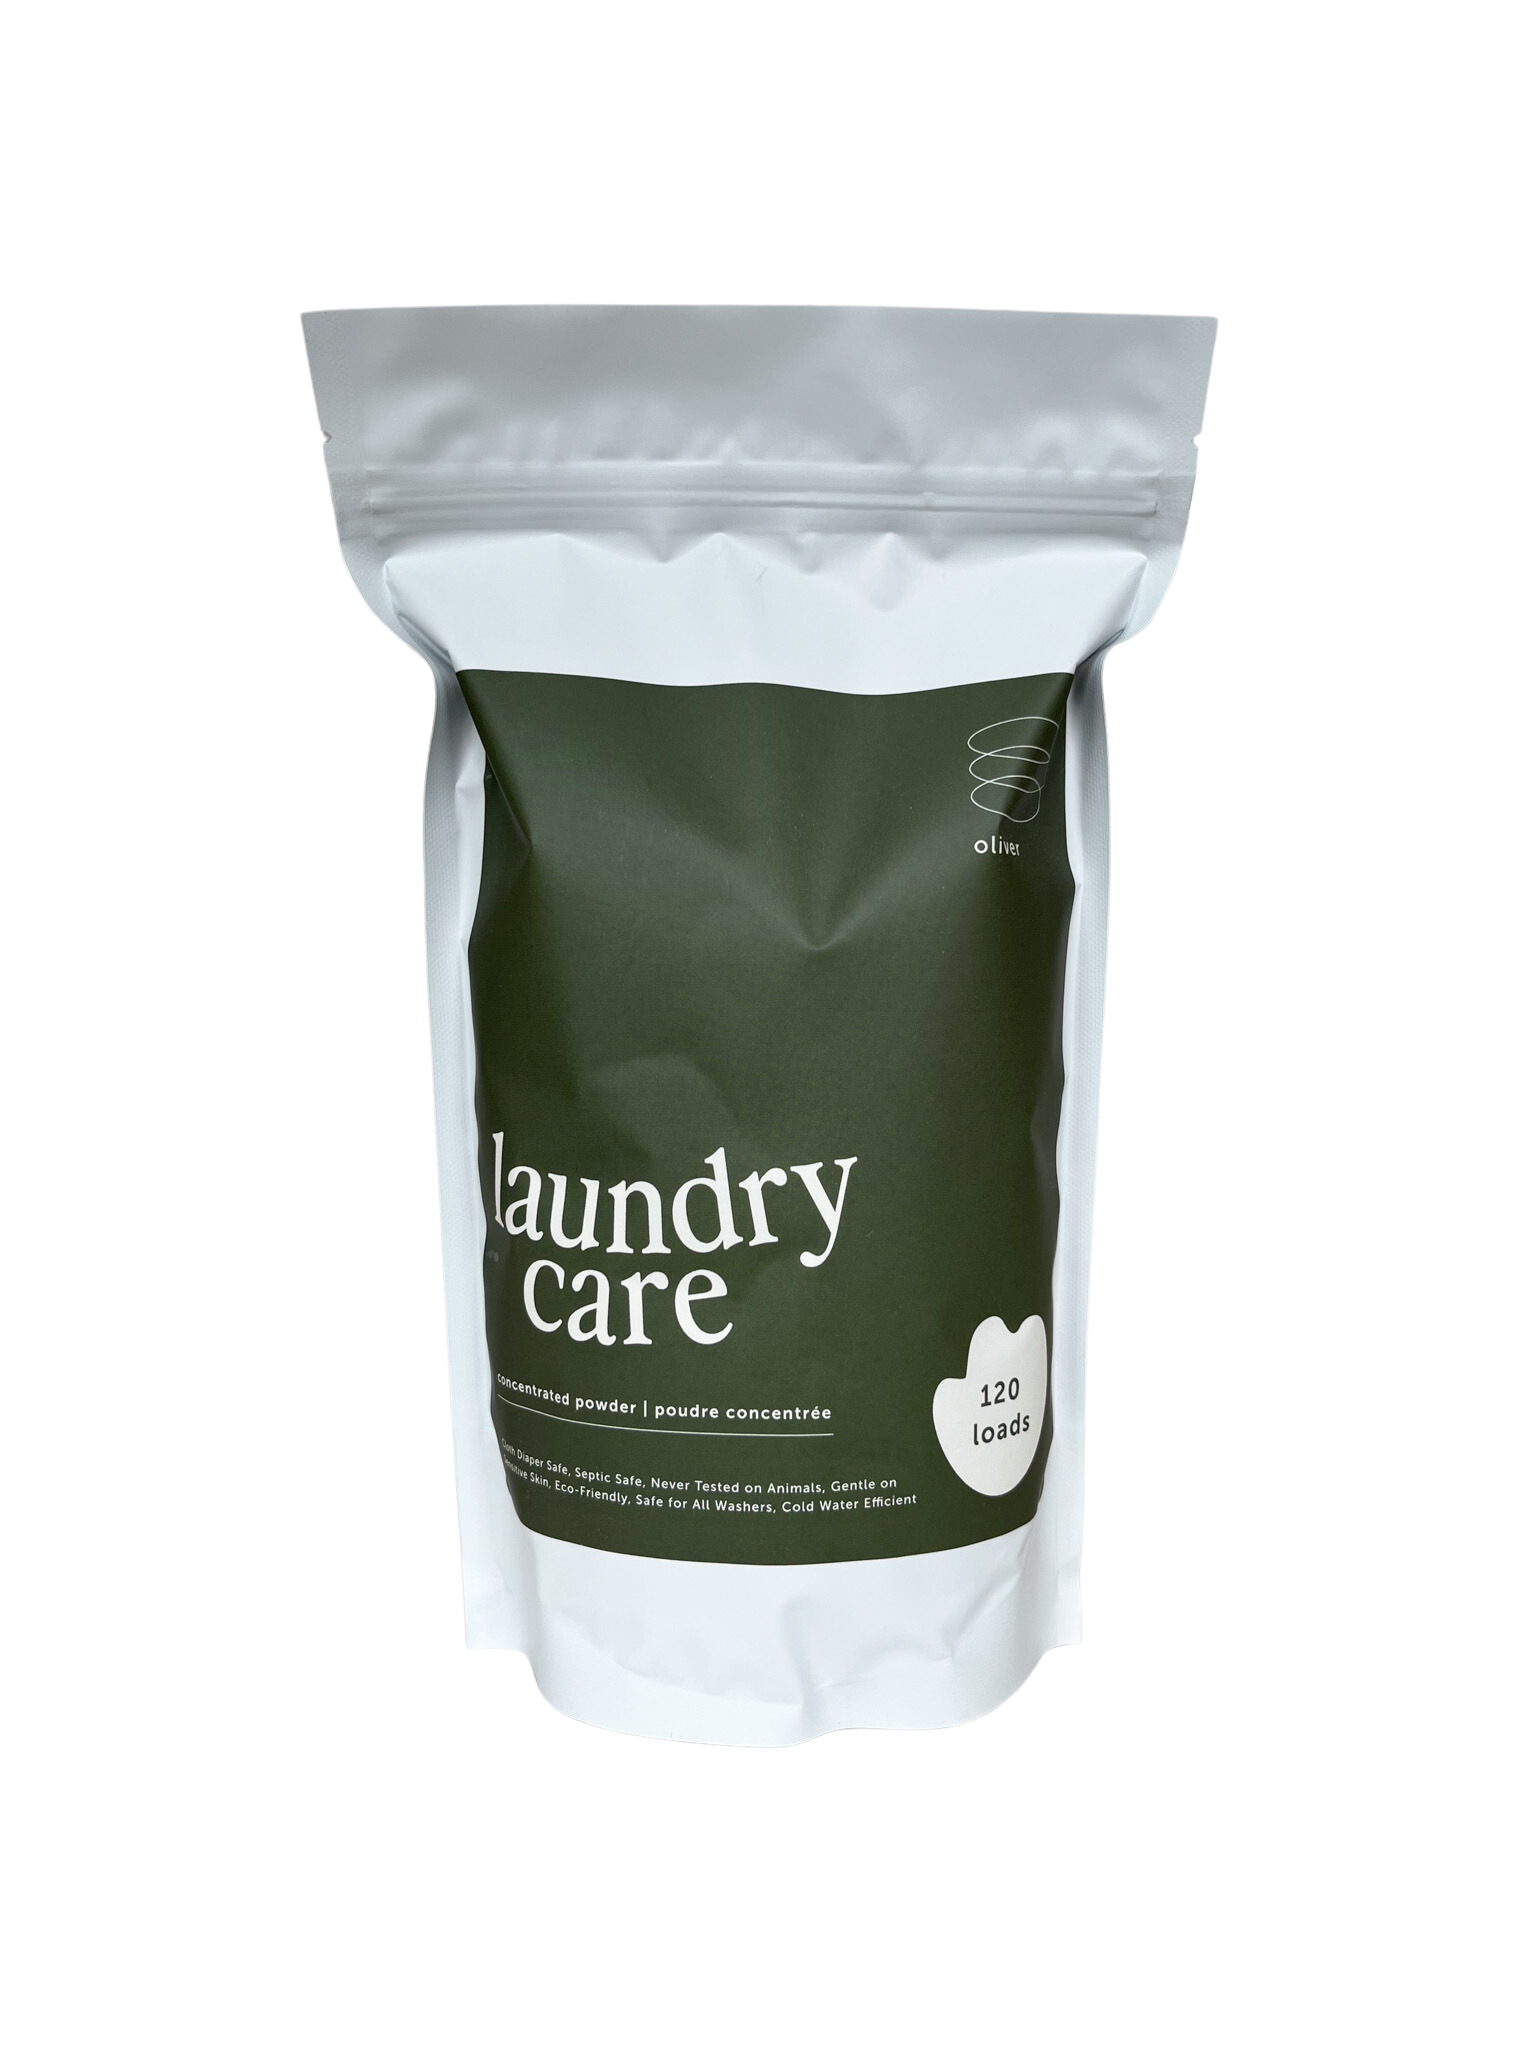 Oliver Laundry Care